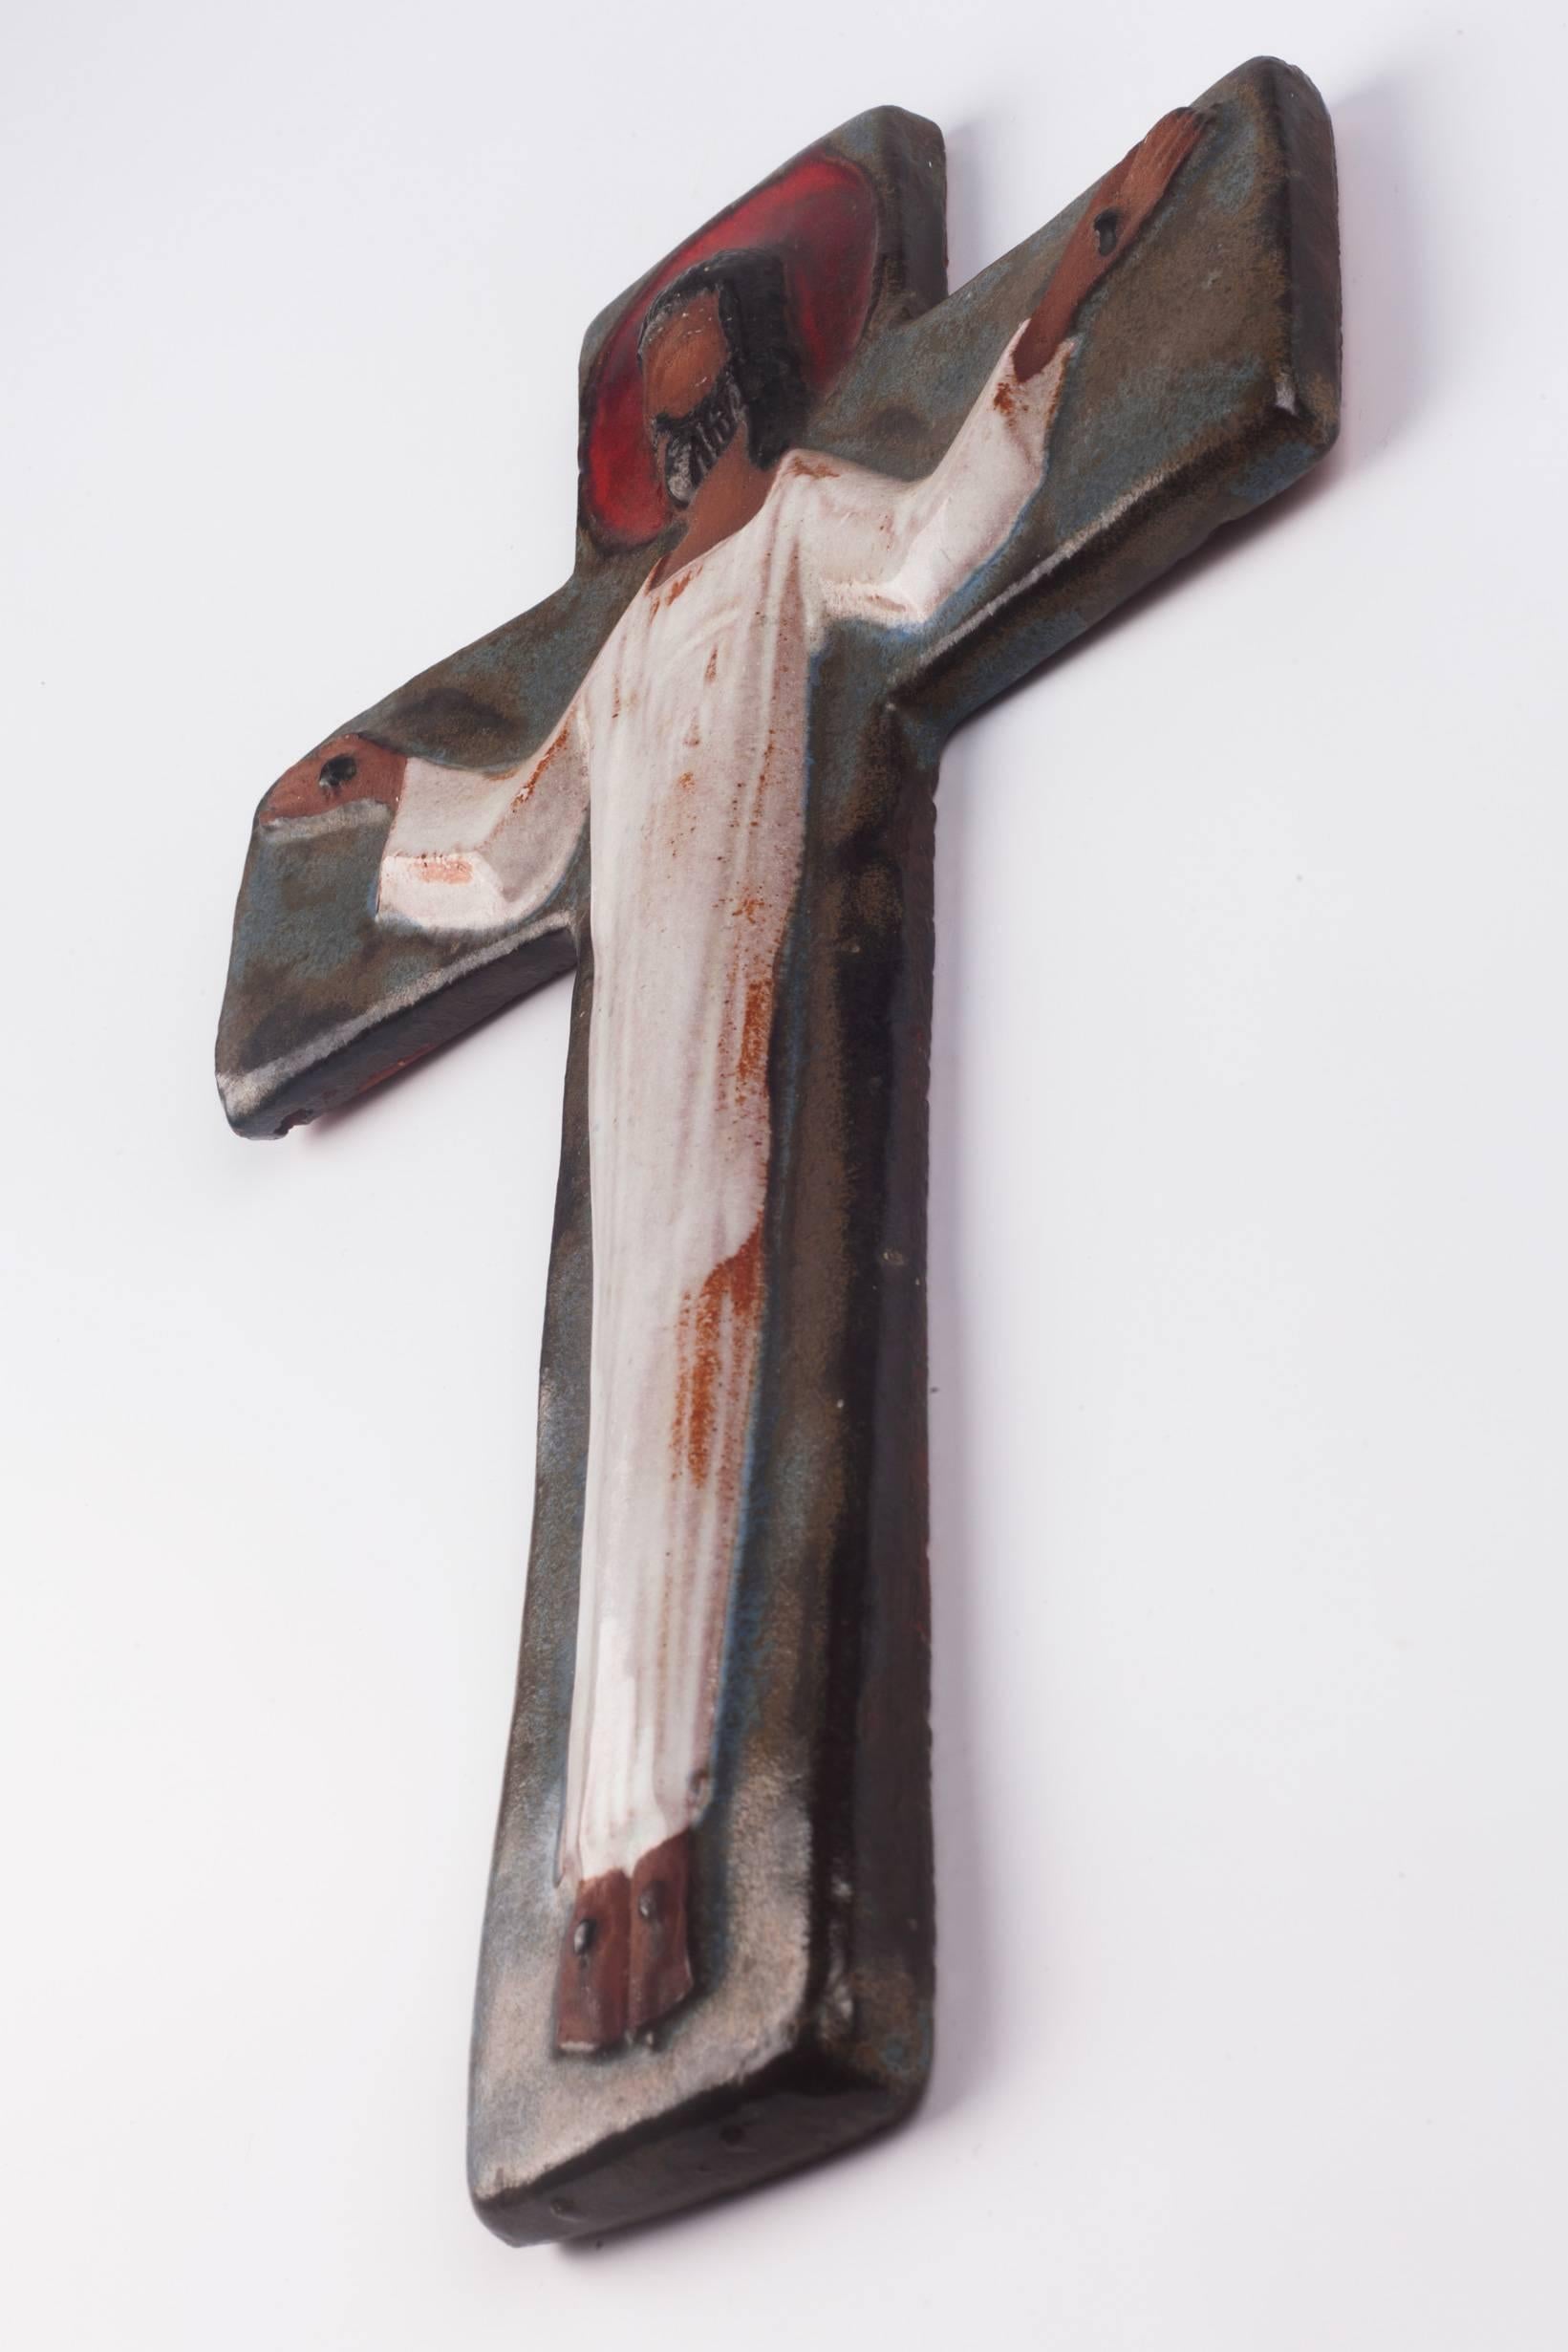 Large wall cross in ceramic, nearly ten inches tall, handmade in Belgium in the 1970s. Hand-painted in brown with hues of blue, white, and red. 

This piece is part of a 69-piece ceramic crucifix collection, all handmade in Belgium between the